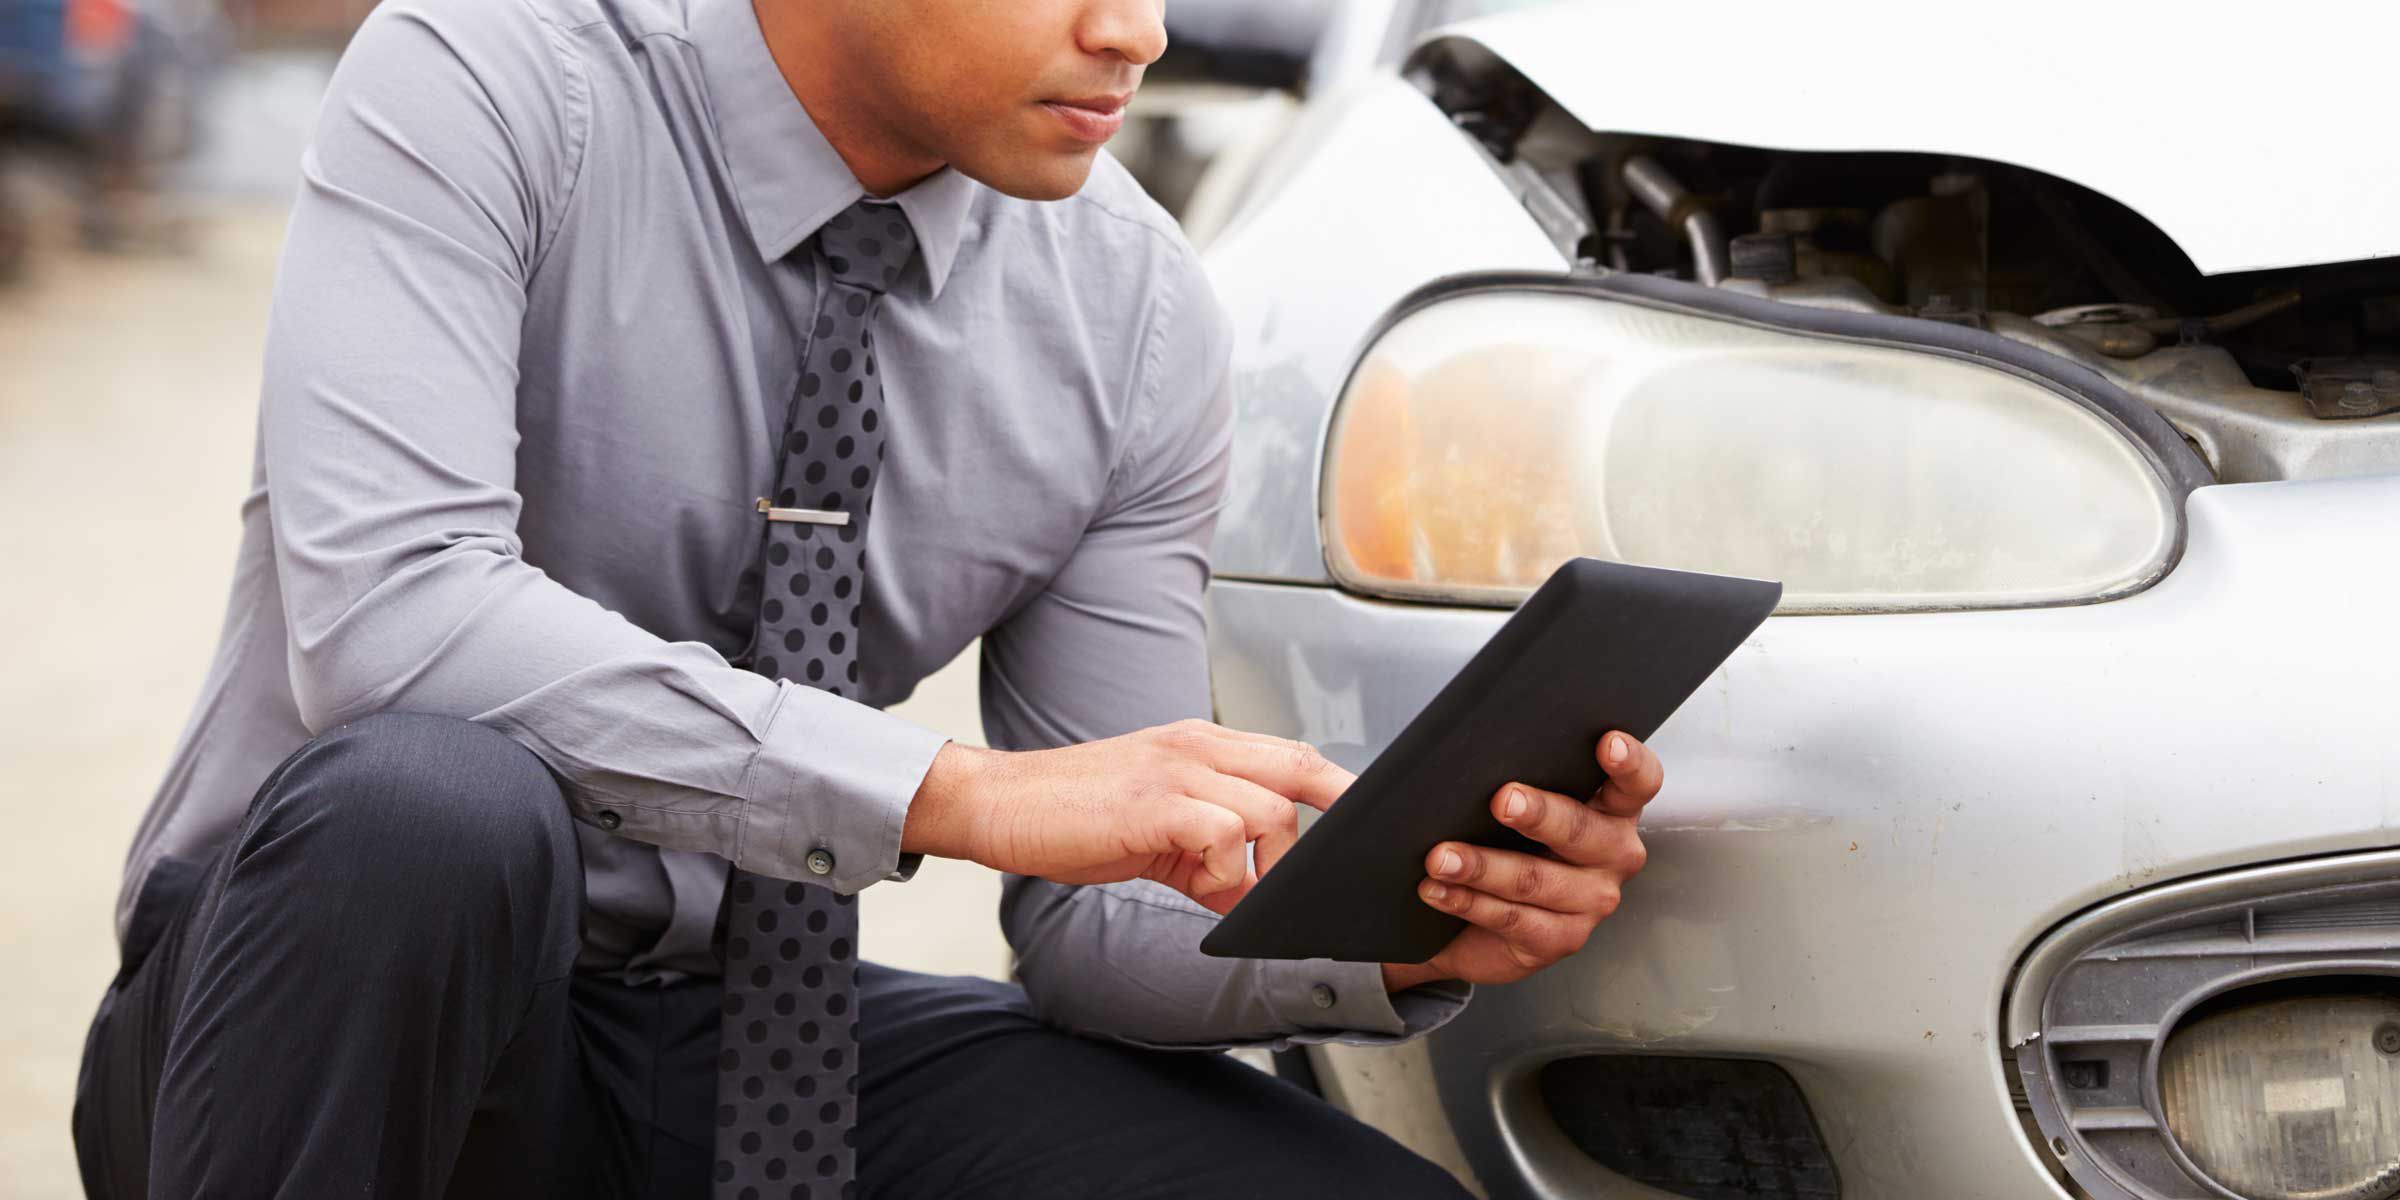 a man is sitting in the front of a car, looking at a tablet